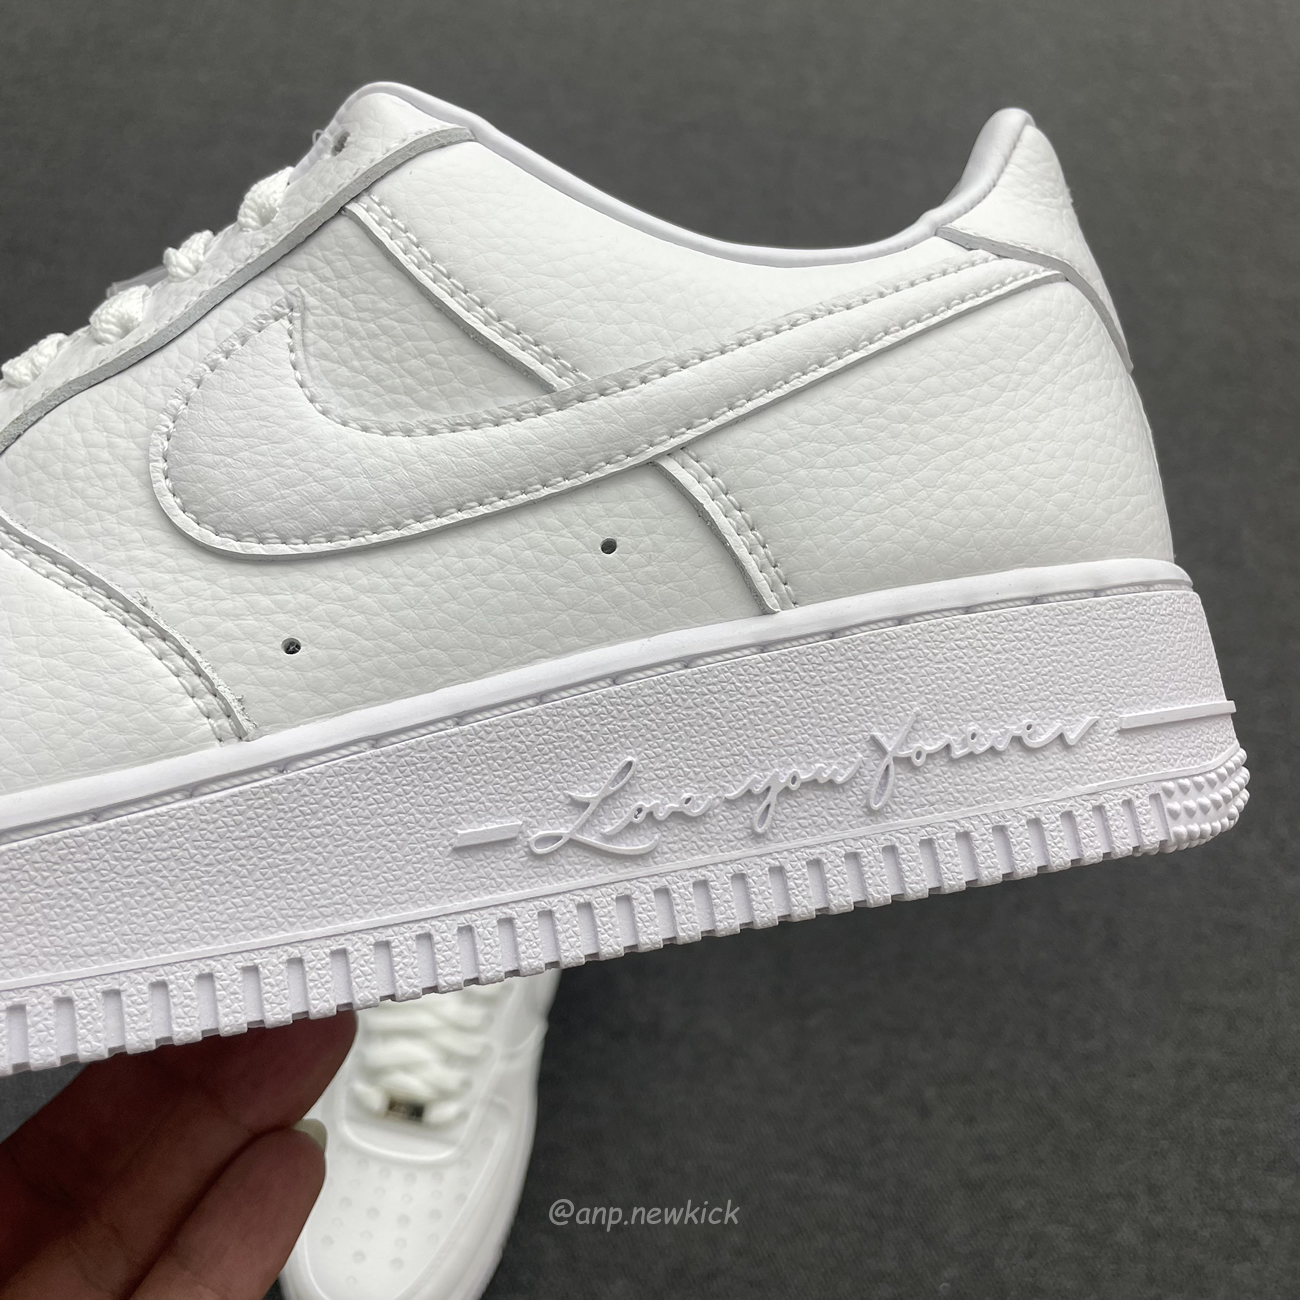 Nike Air Force 1 Low Drake Nocta Certified Lover Boy Cz8065 100 (11) - newkick.org